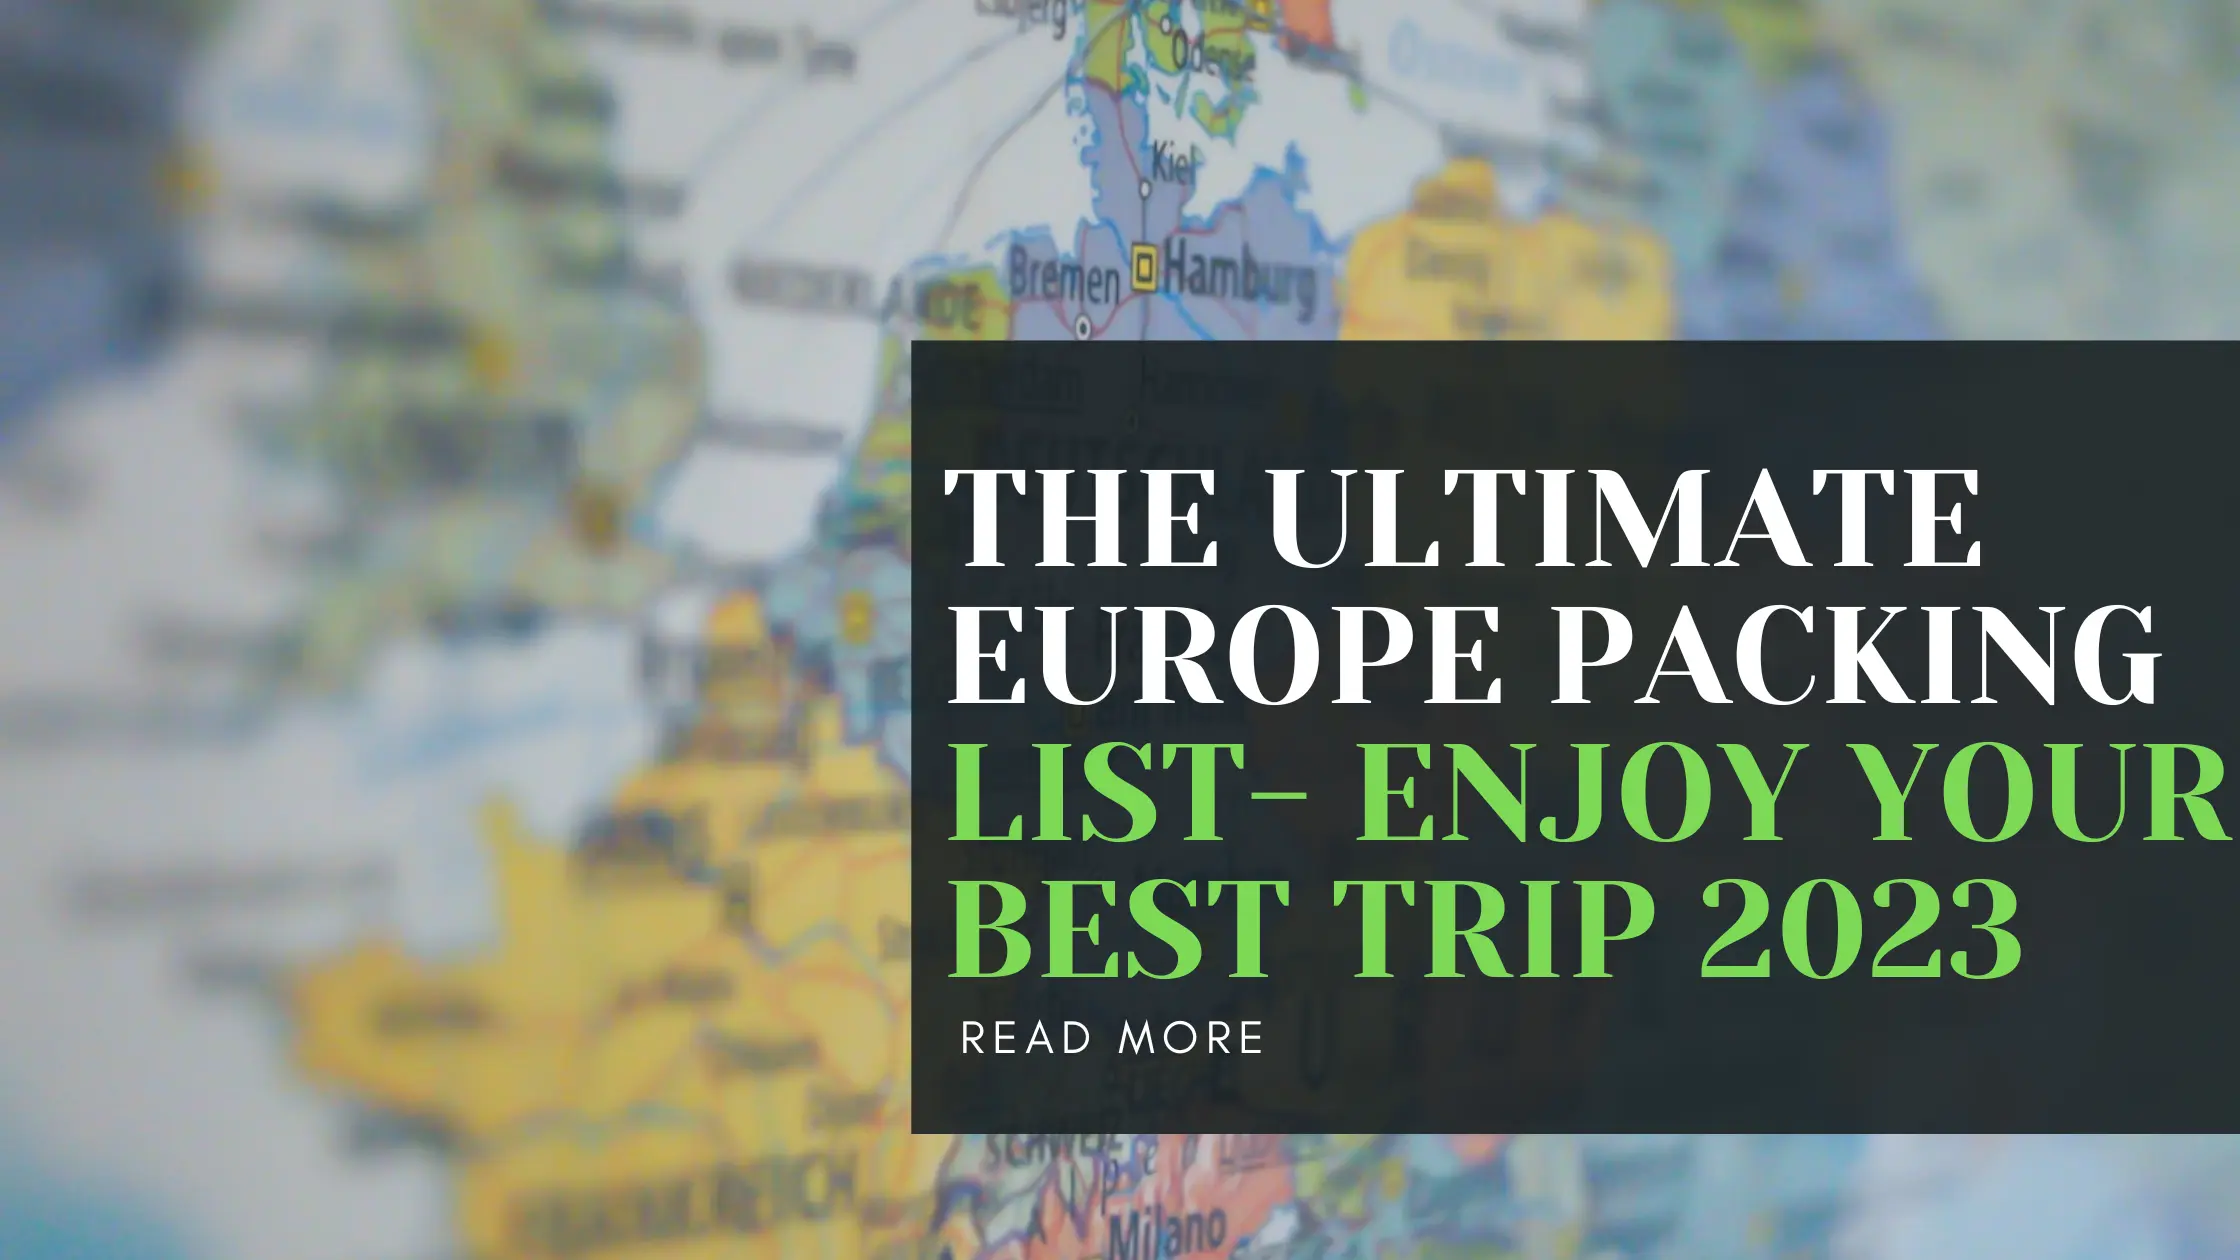 The Ultimate Europe Packing List- Enjoy Your Best Trip 2023